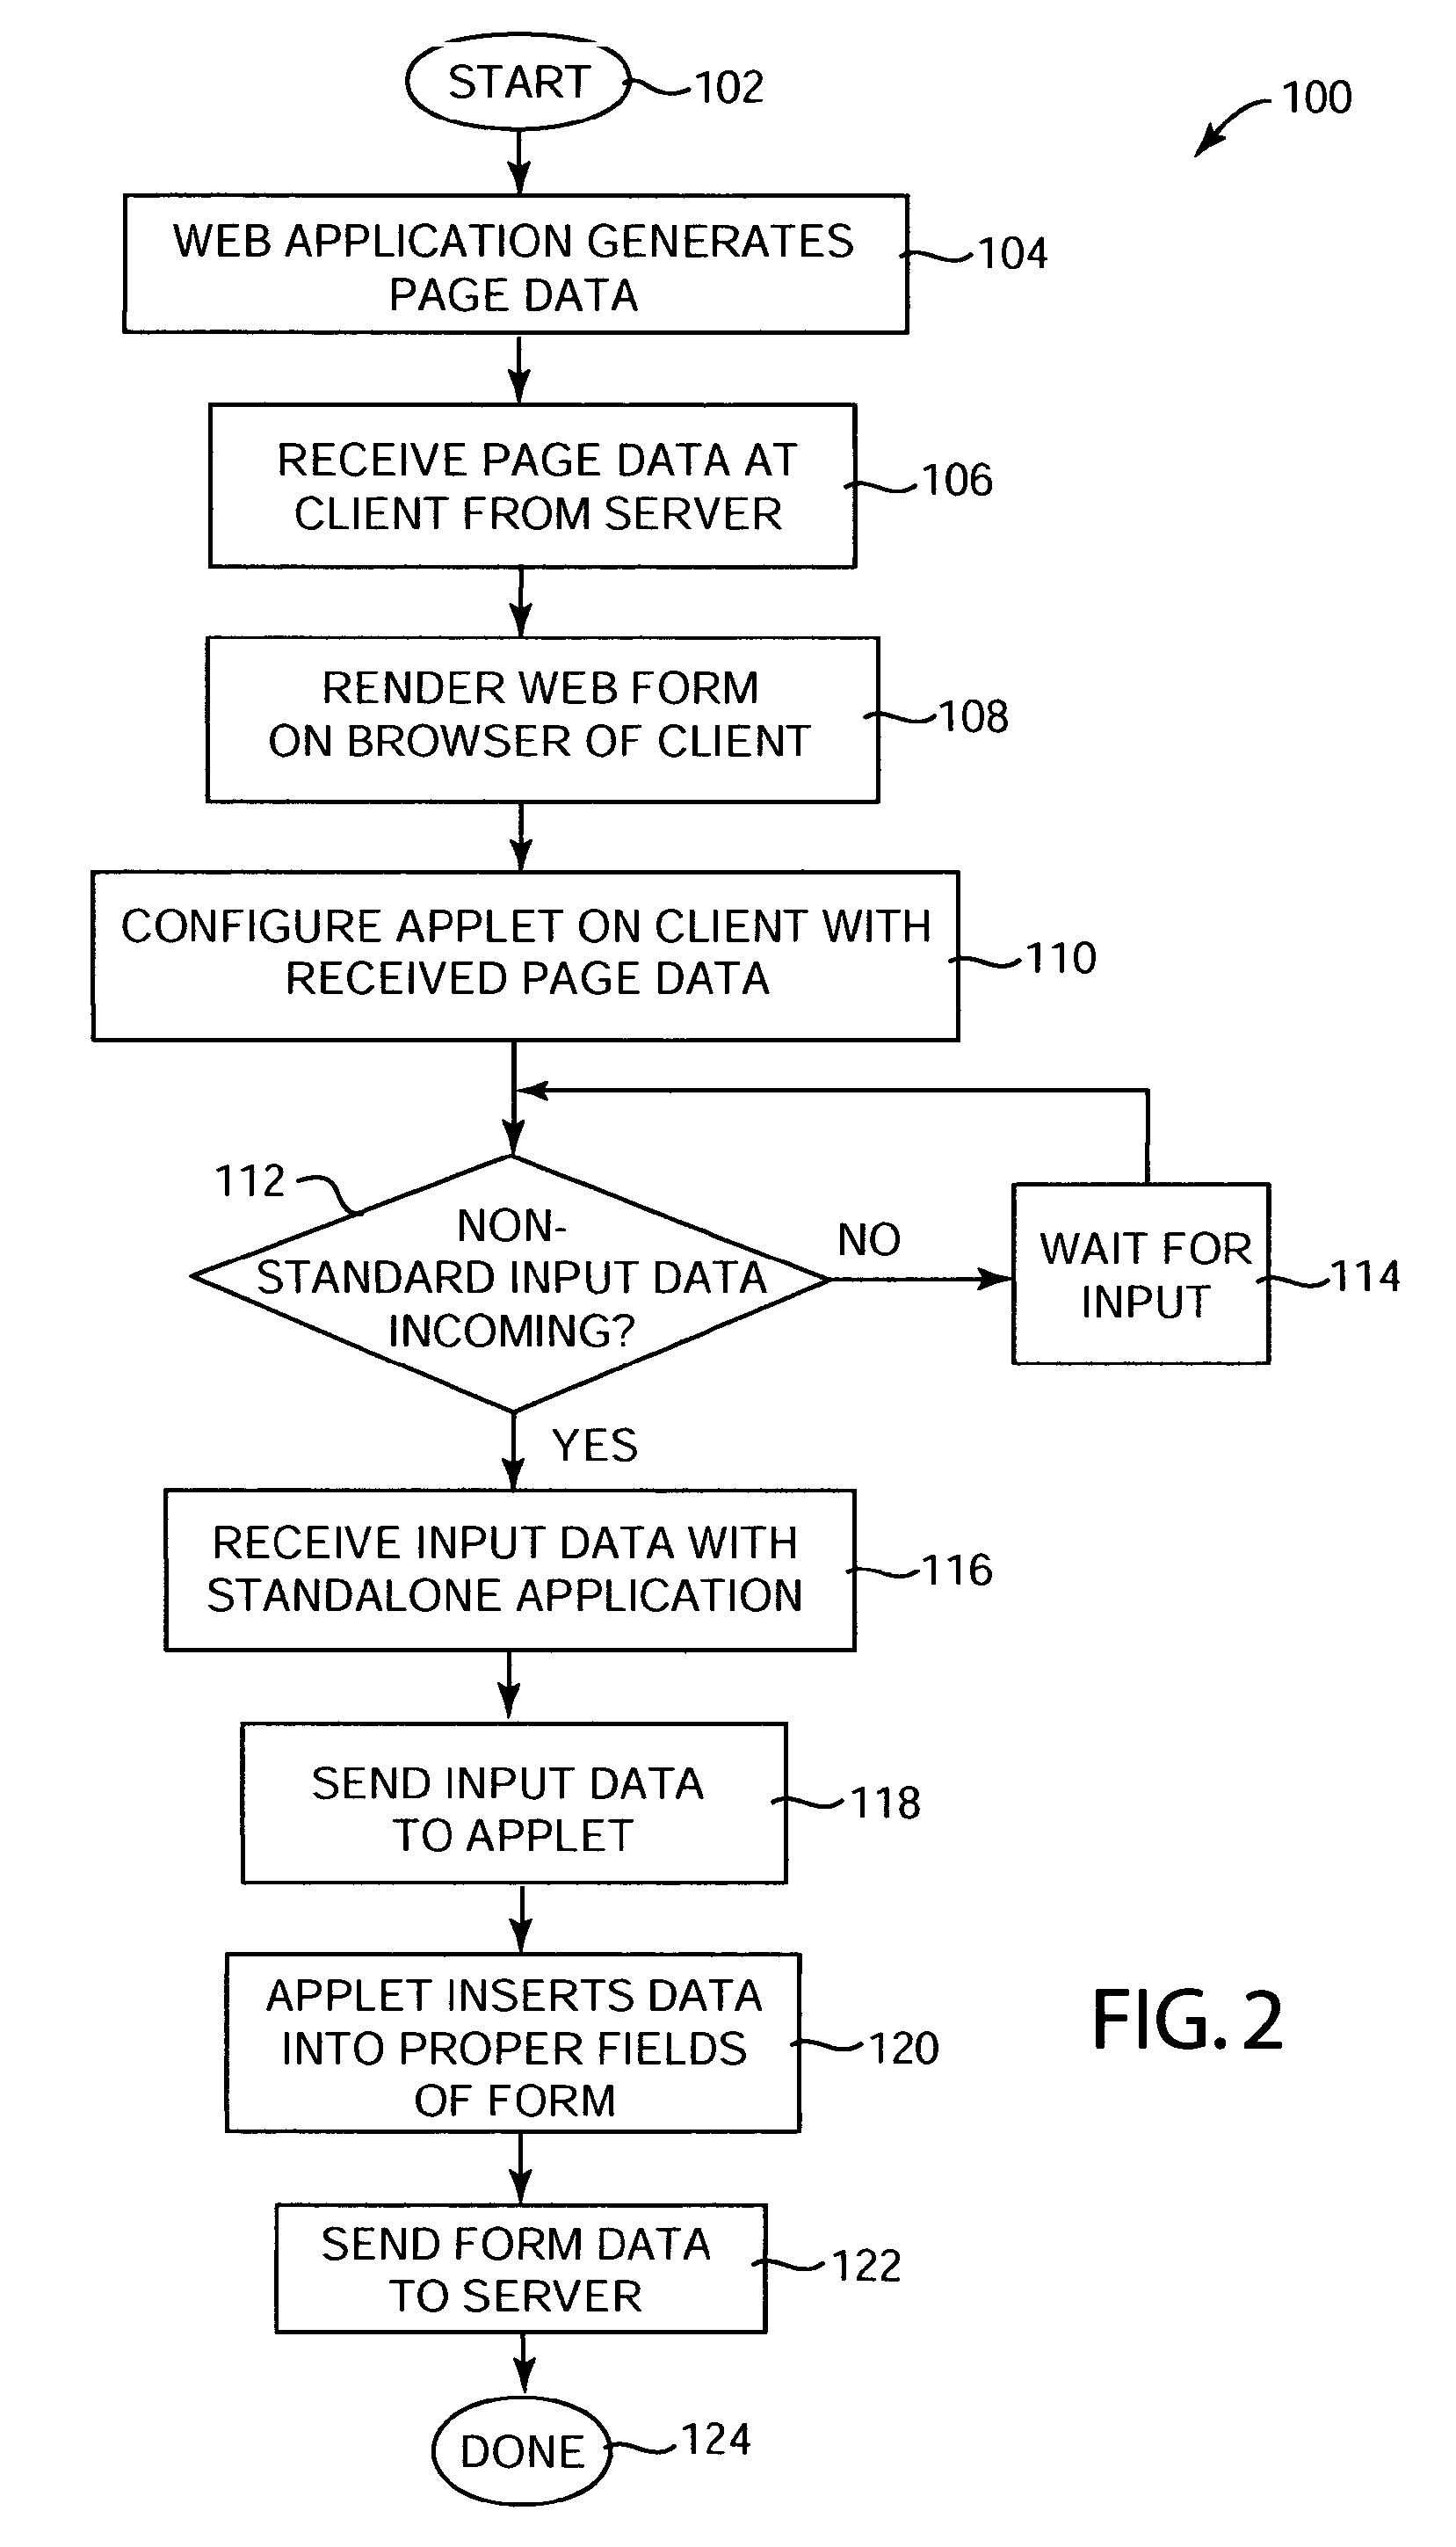 System for input and output of data with non-standard I/O devices for web applications